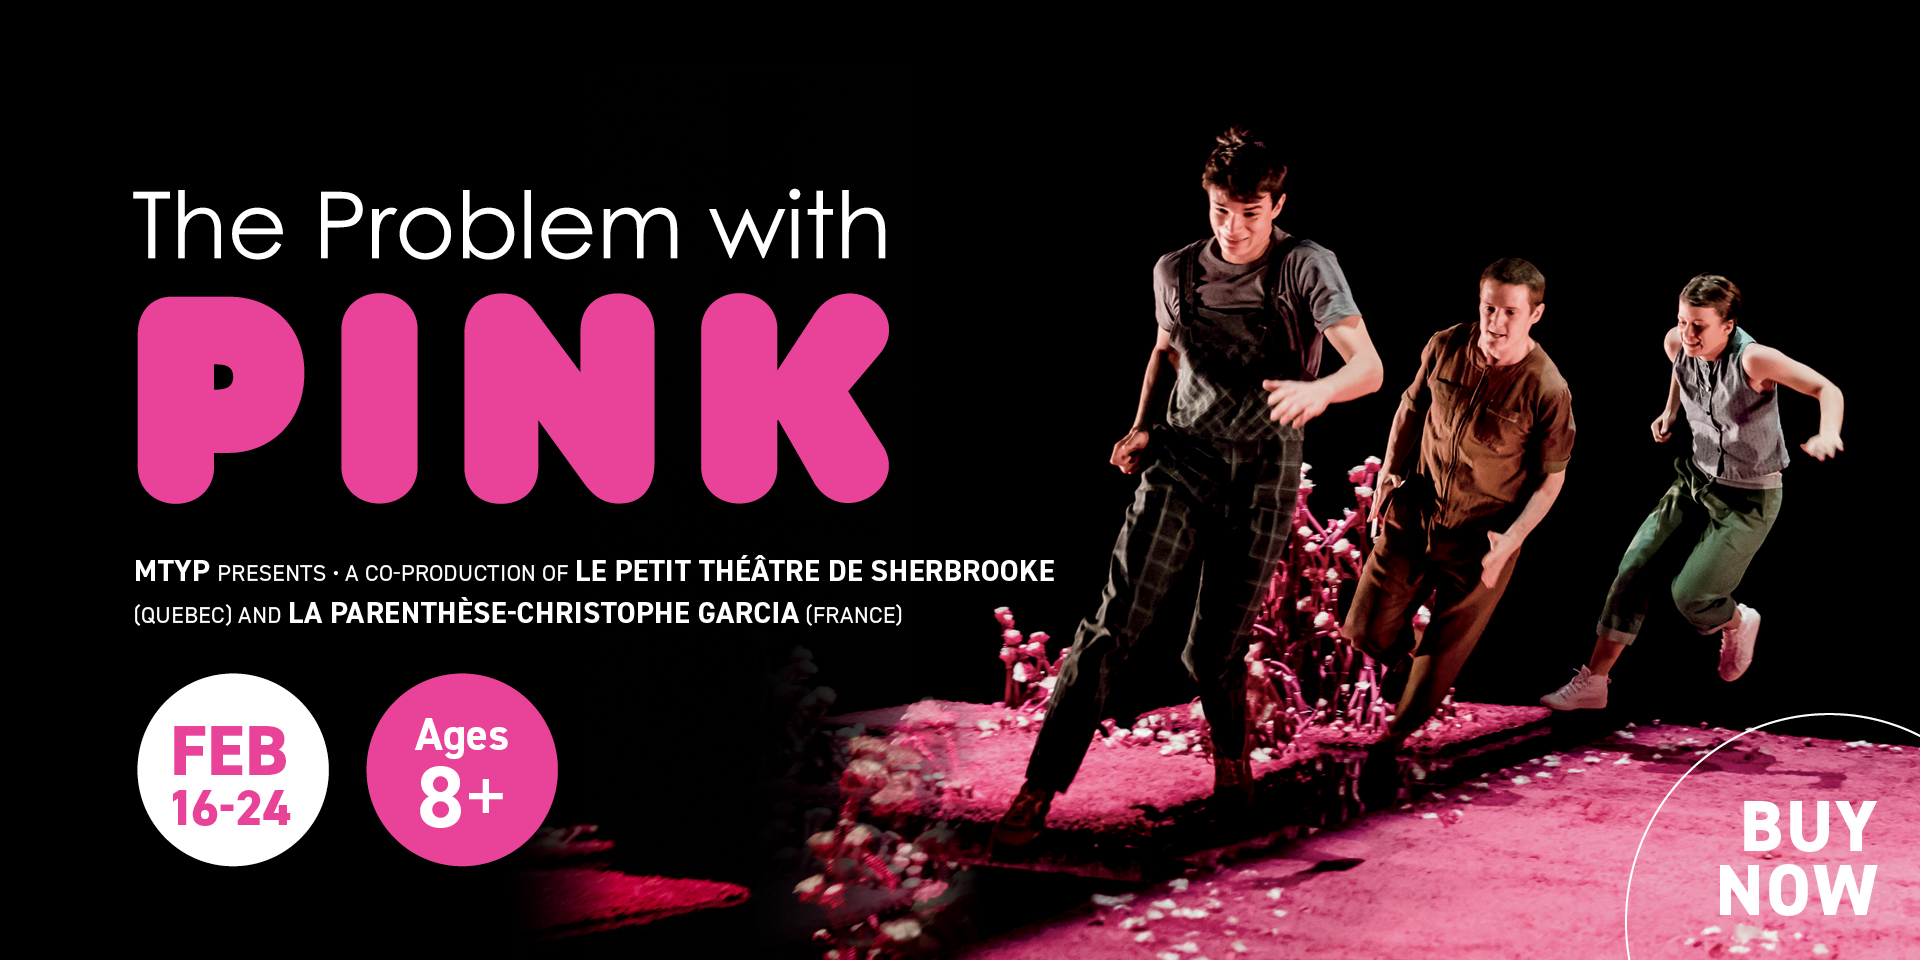 The Problem with Pink. February 16-24. Click